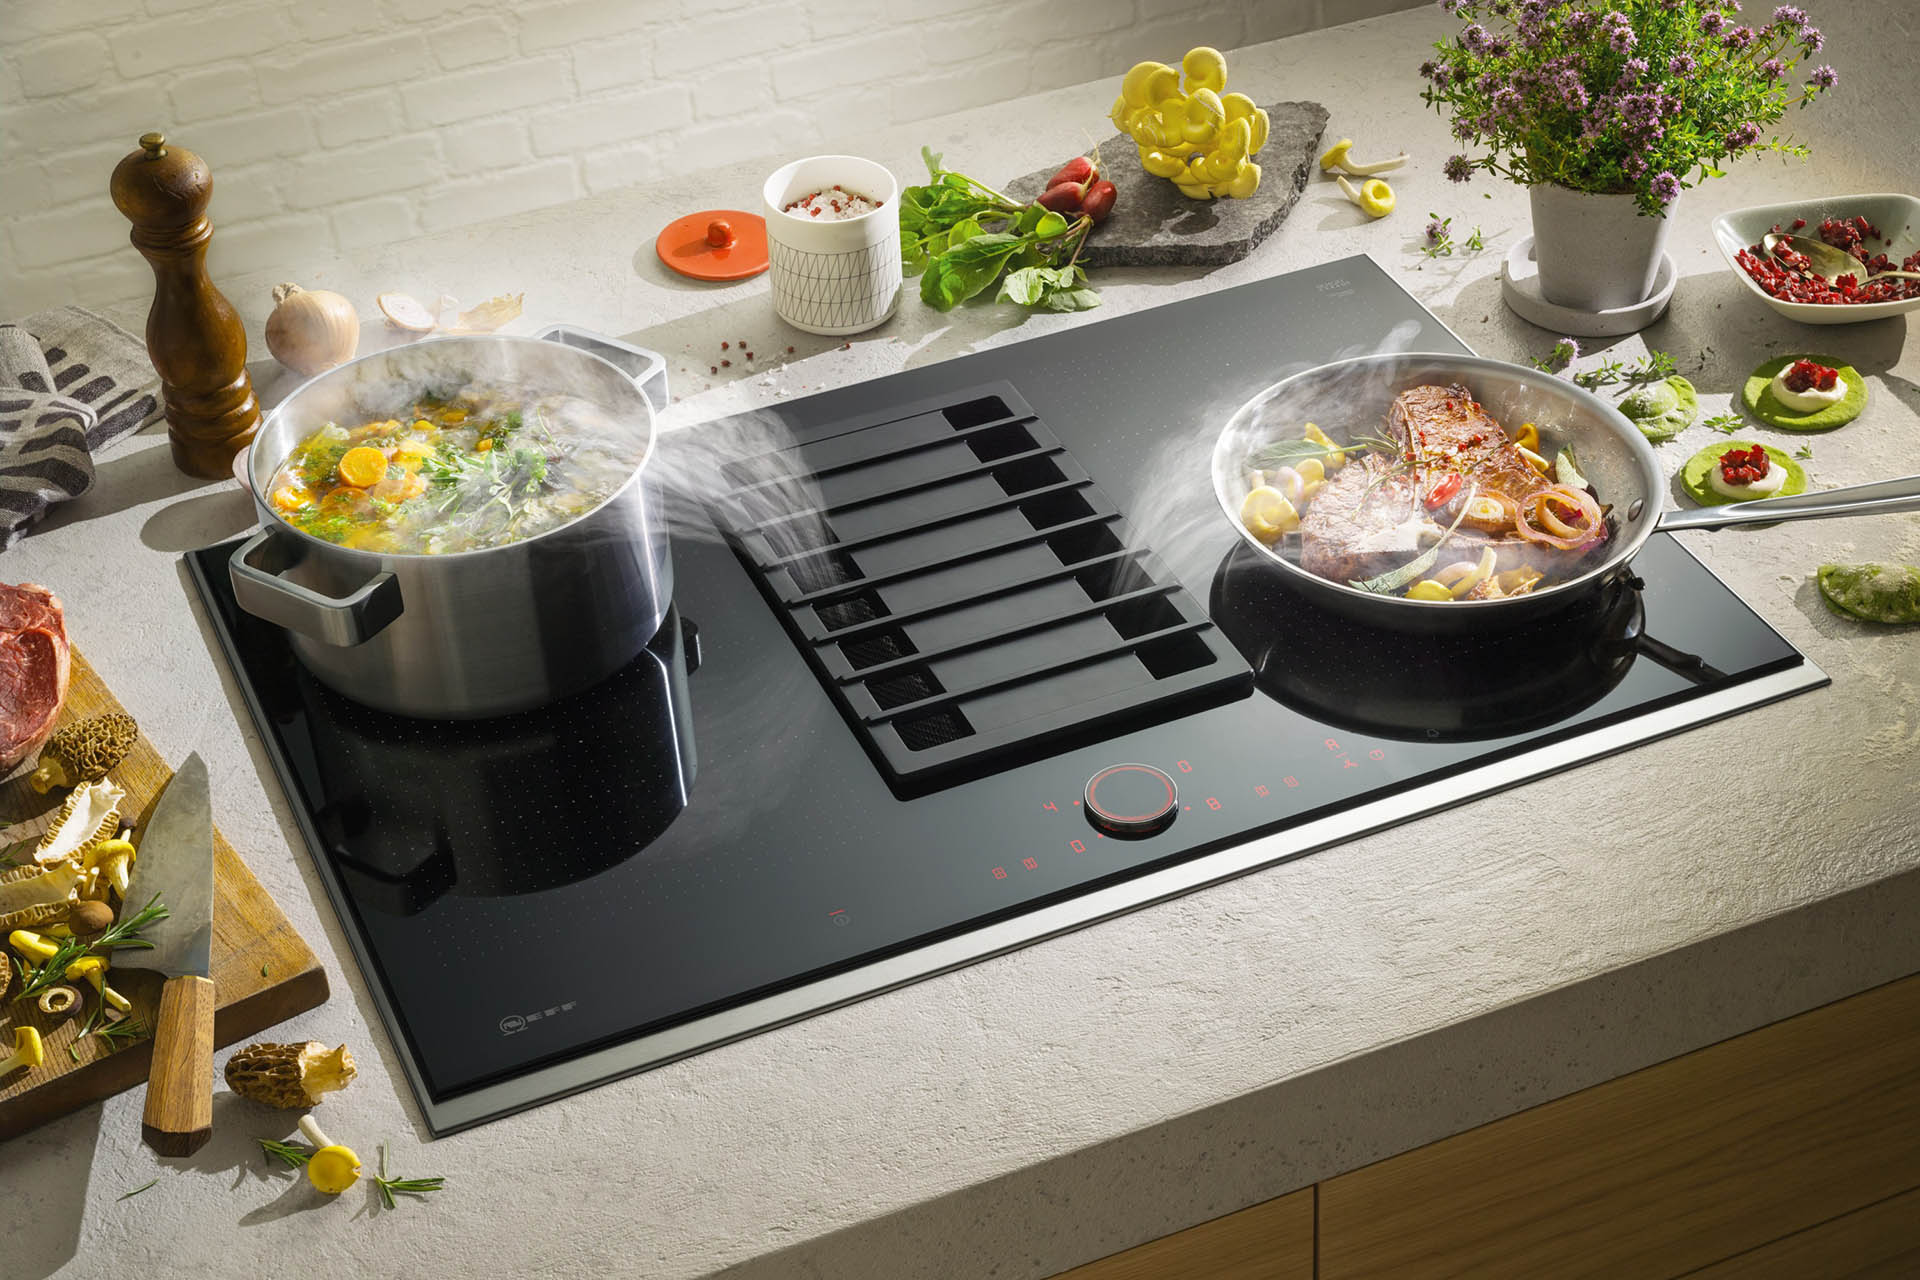 kitchen stove with boilinh vegetable in a pot and cooktop ventilation